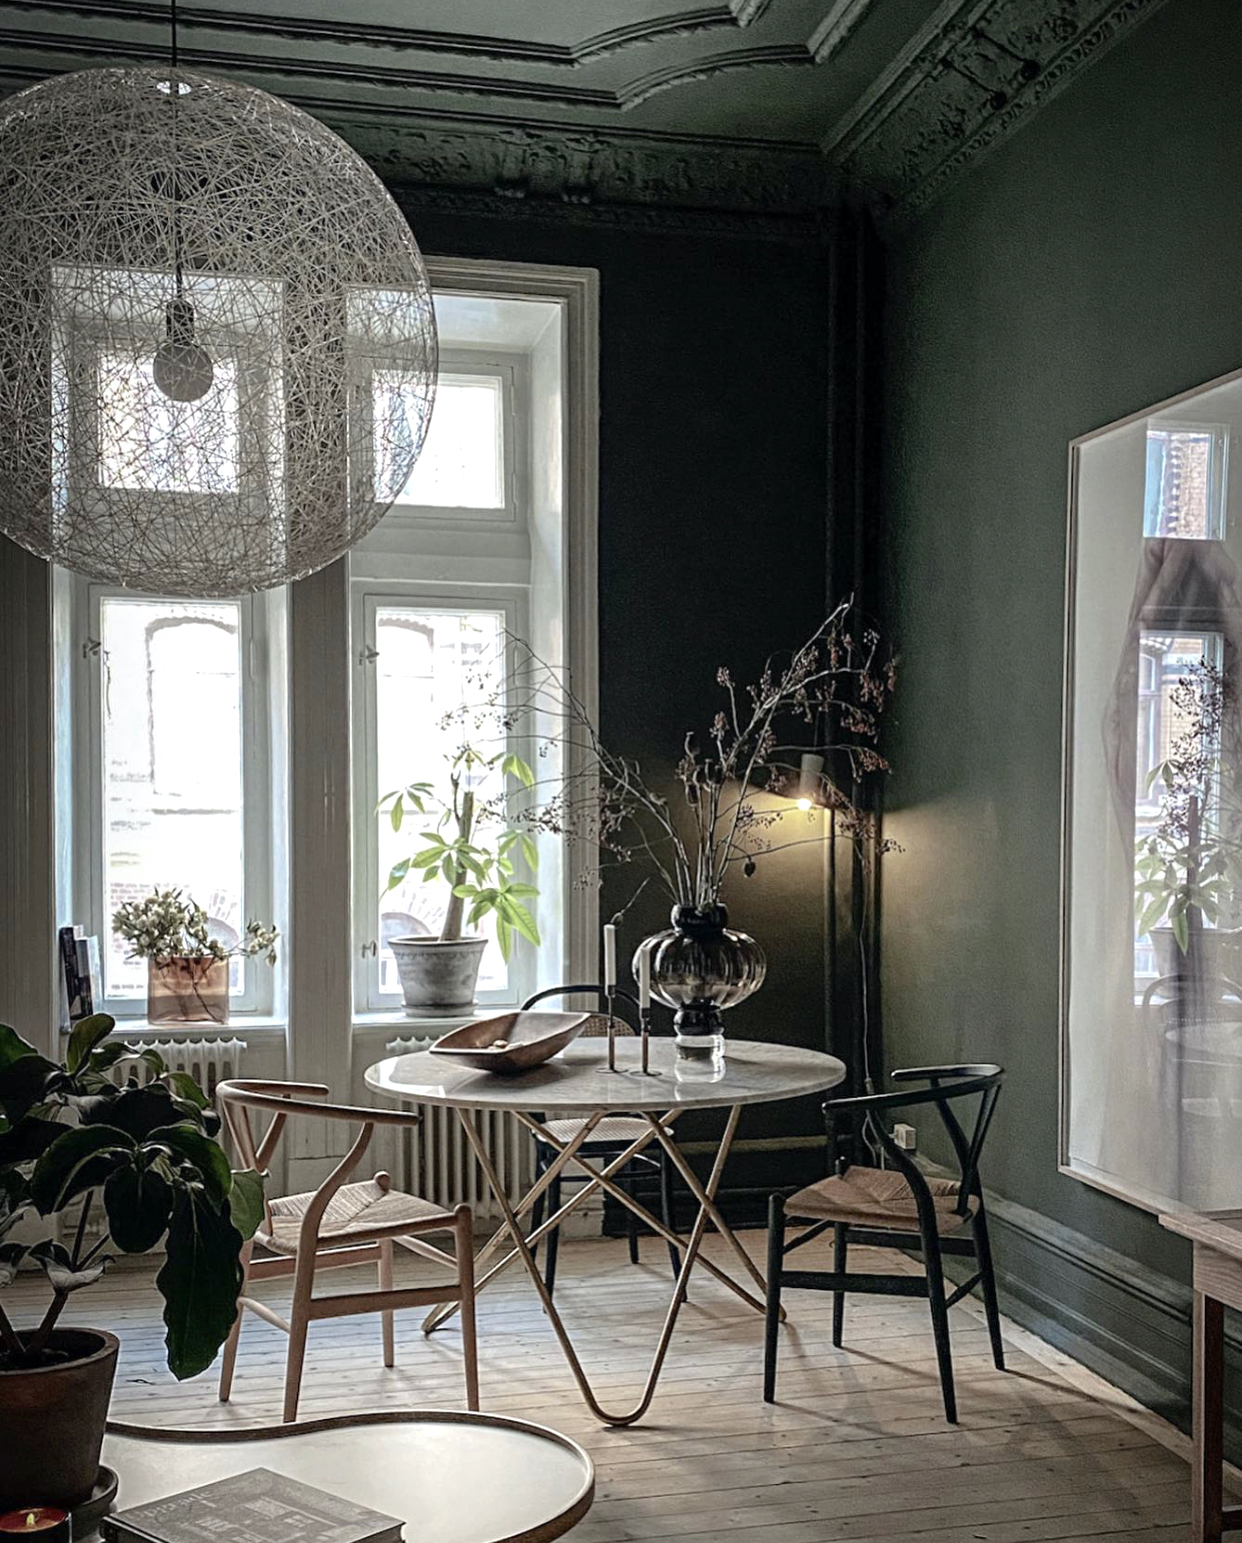 Green Dining Room By Sofie Izard Hoyer, Green Dining Room